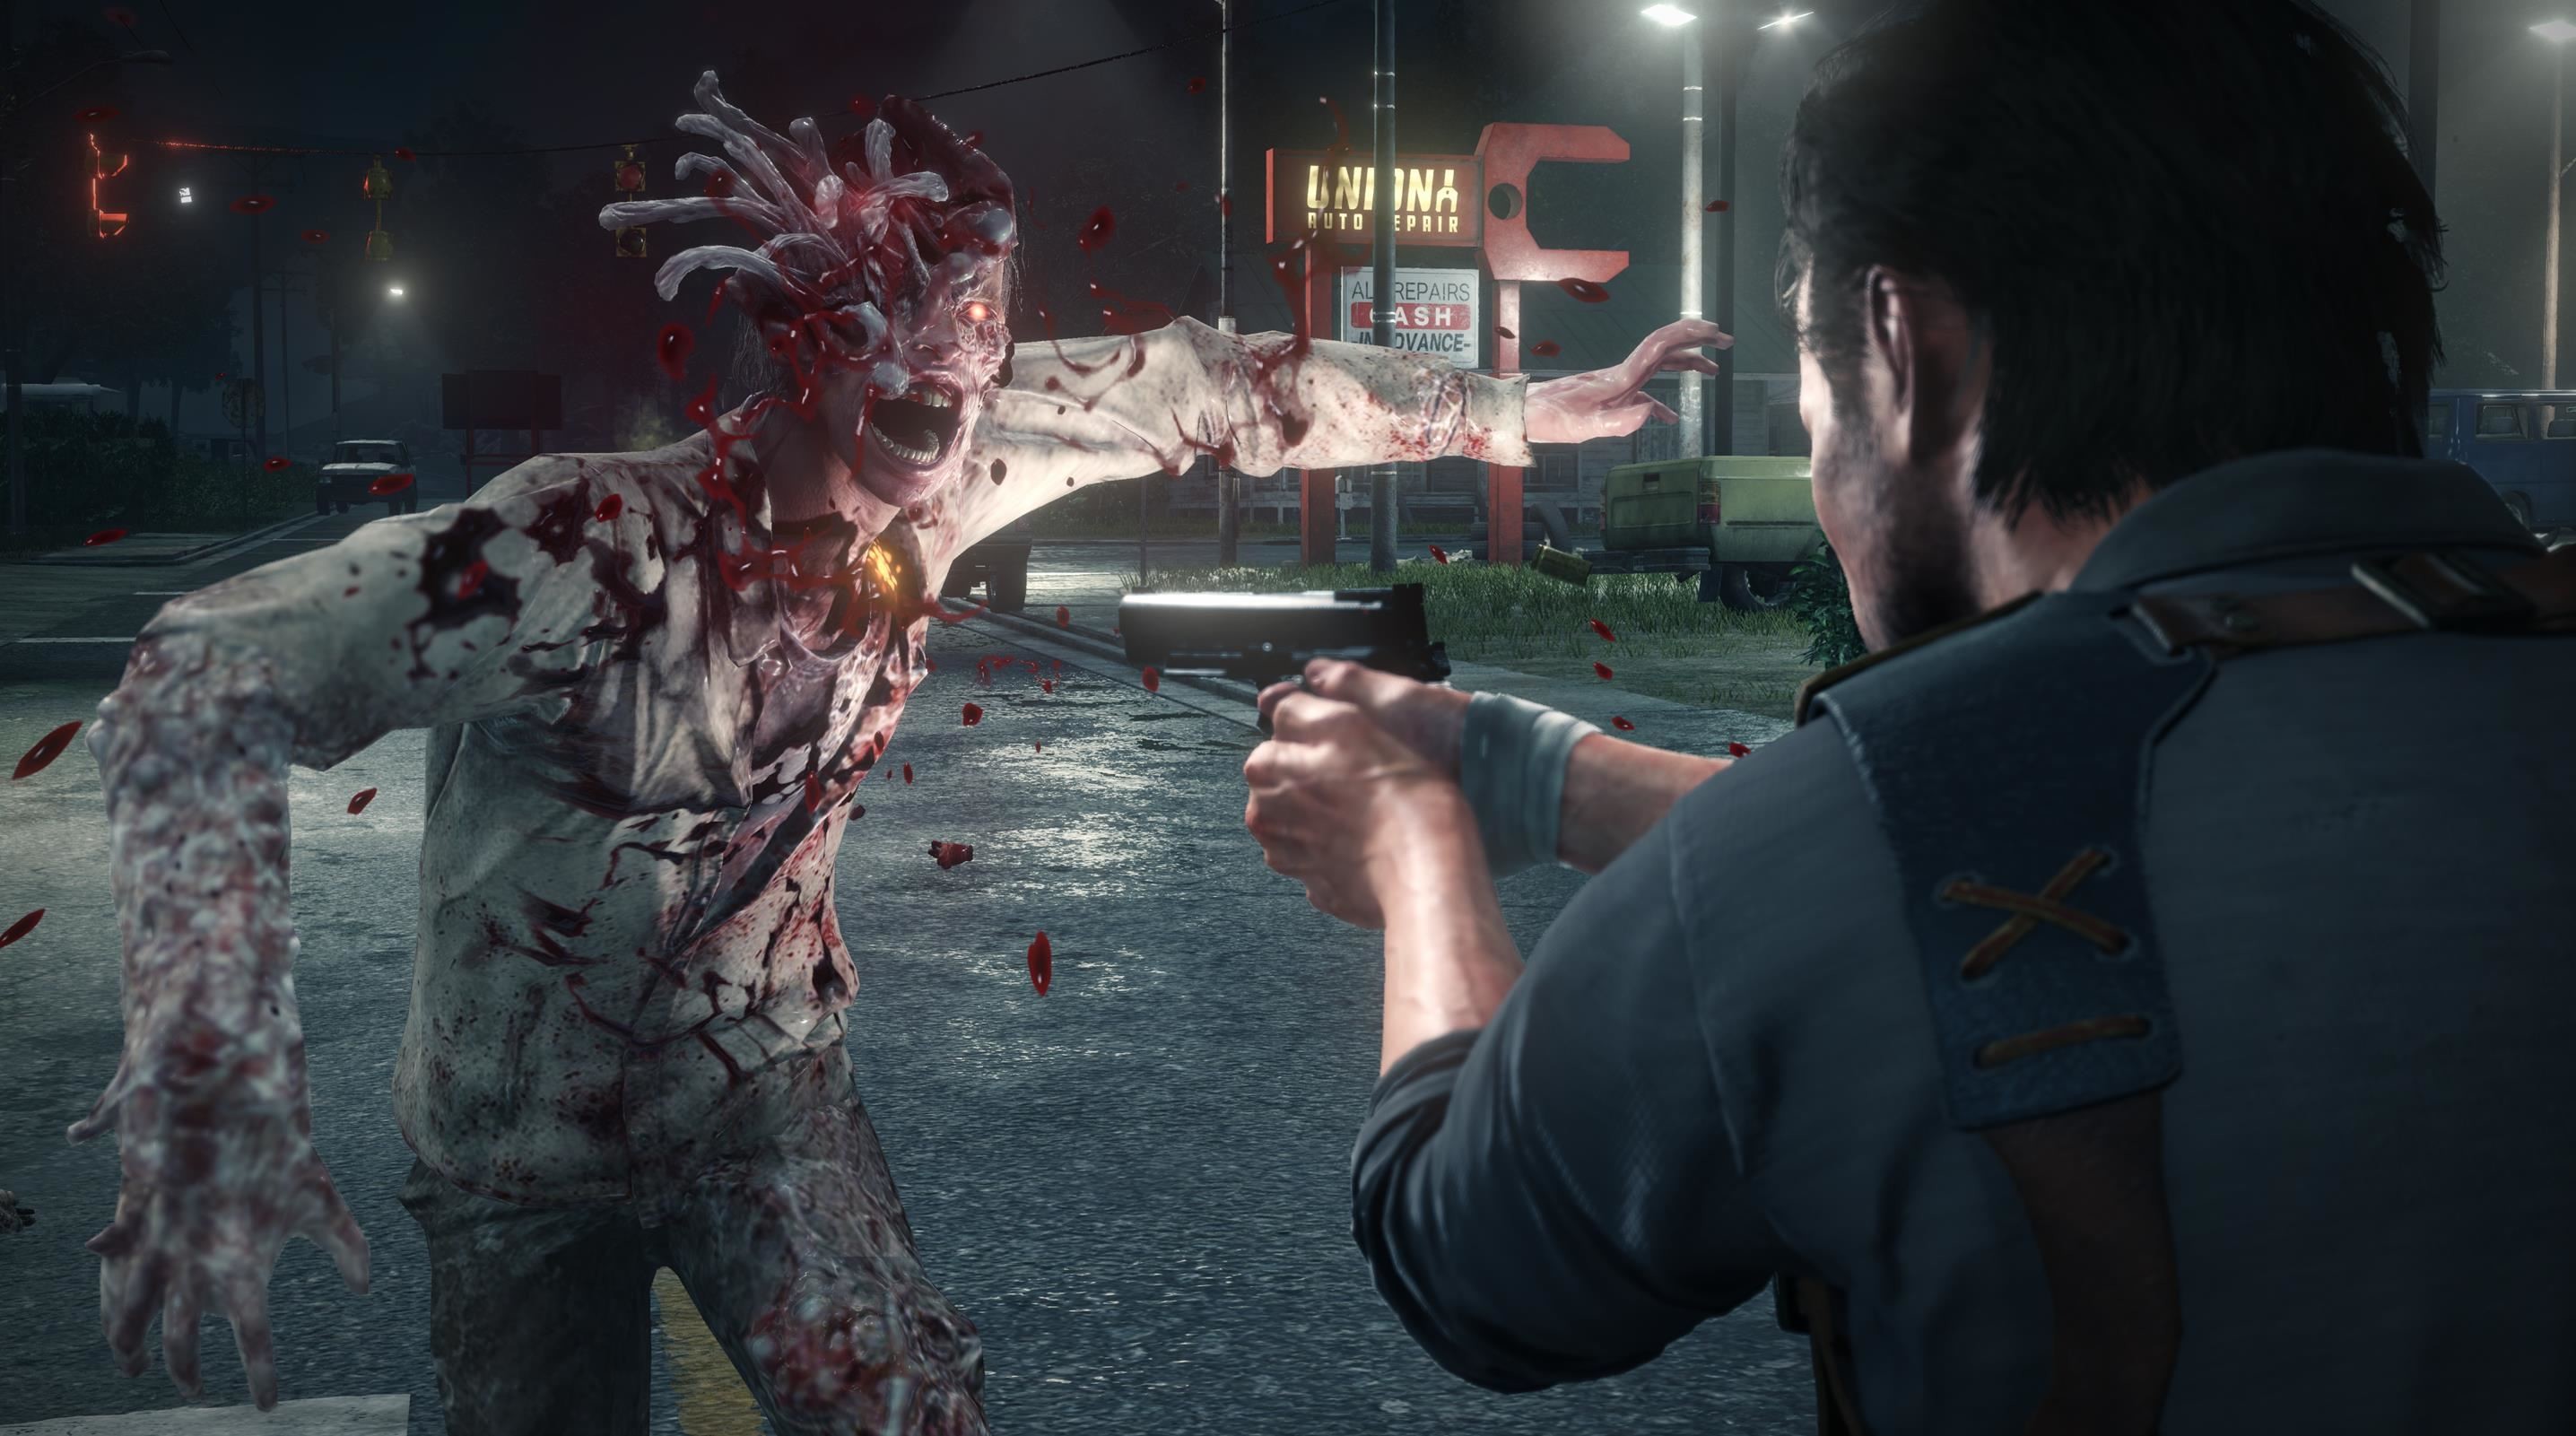 Скриншот *The Evil Within 2 [PS4] 5.05 / 6.72 / 7.02 [EUR] (2017) [Русский] (v1.04)*